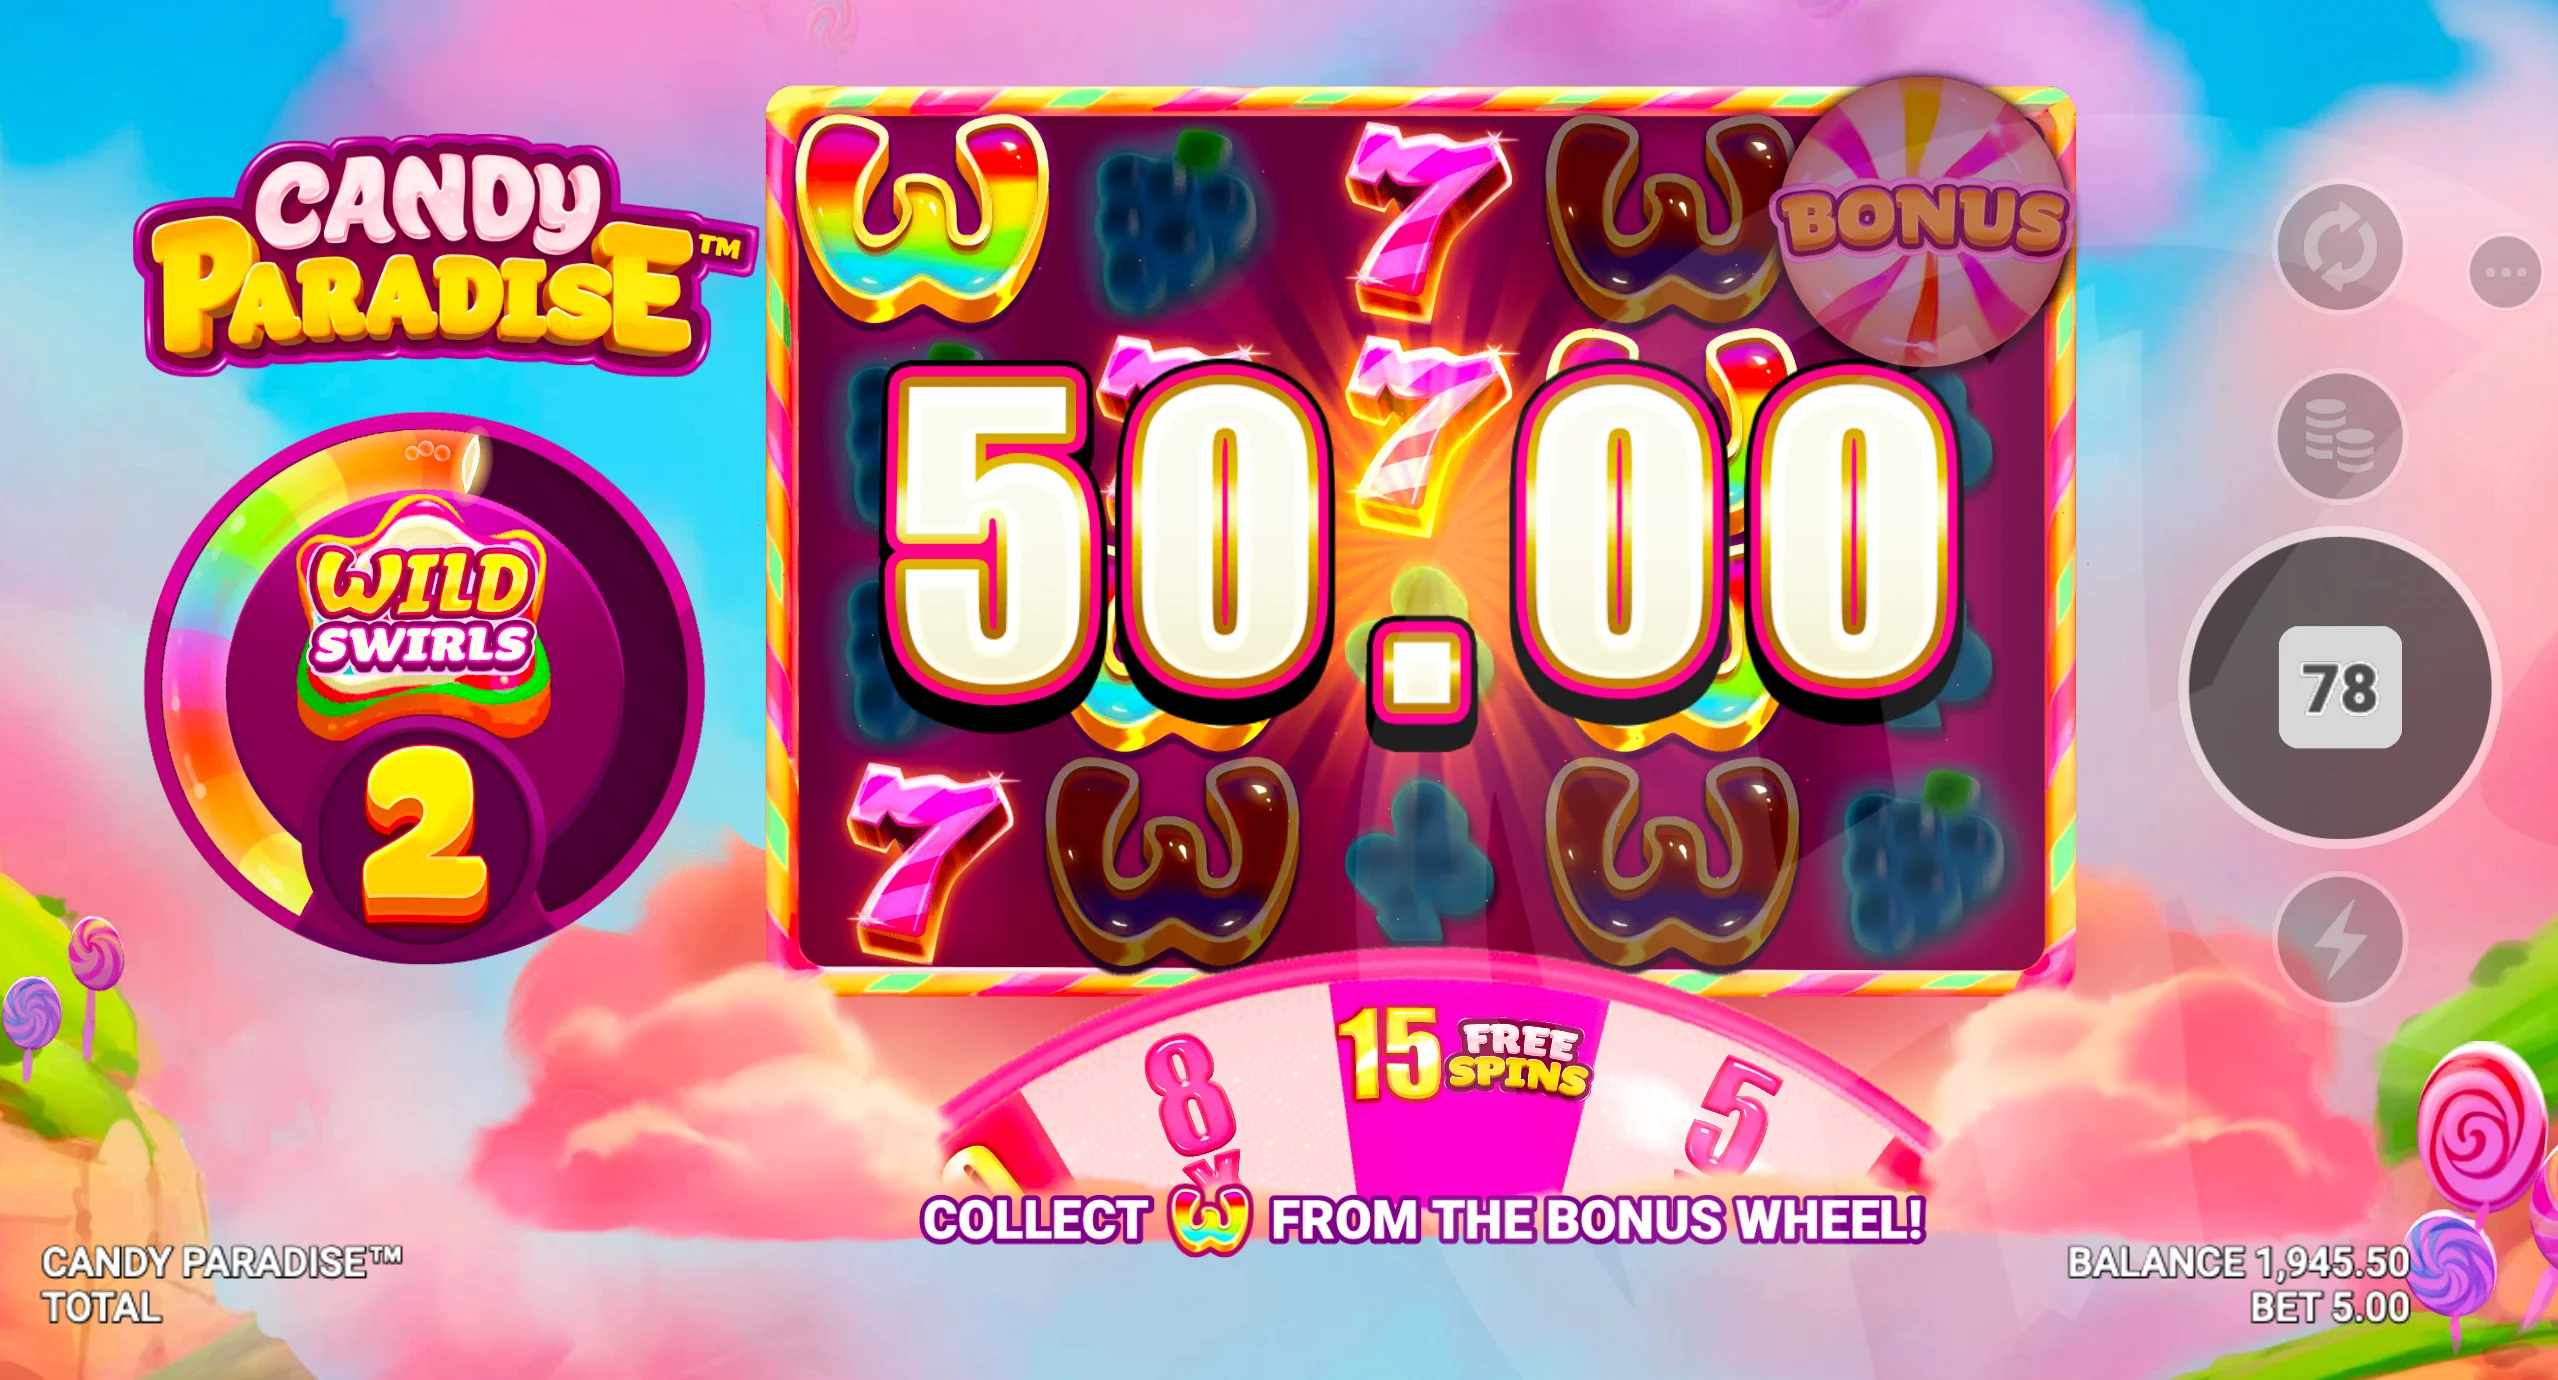 Candy Paradise Offers Players 30 Fixed Win Lines